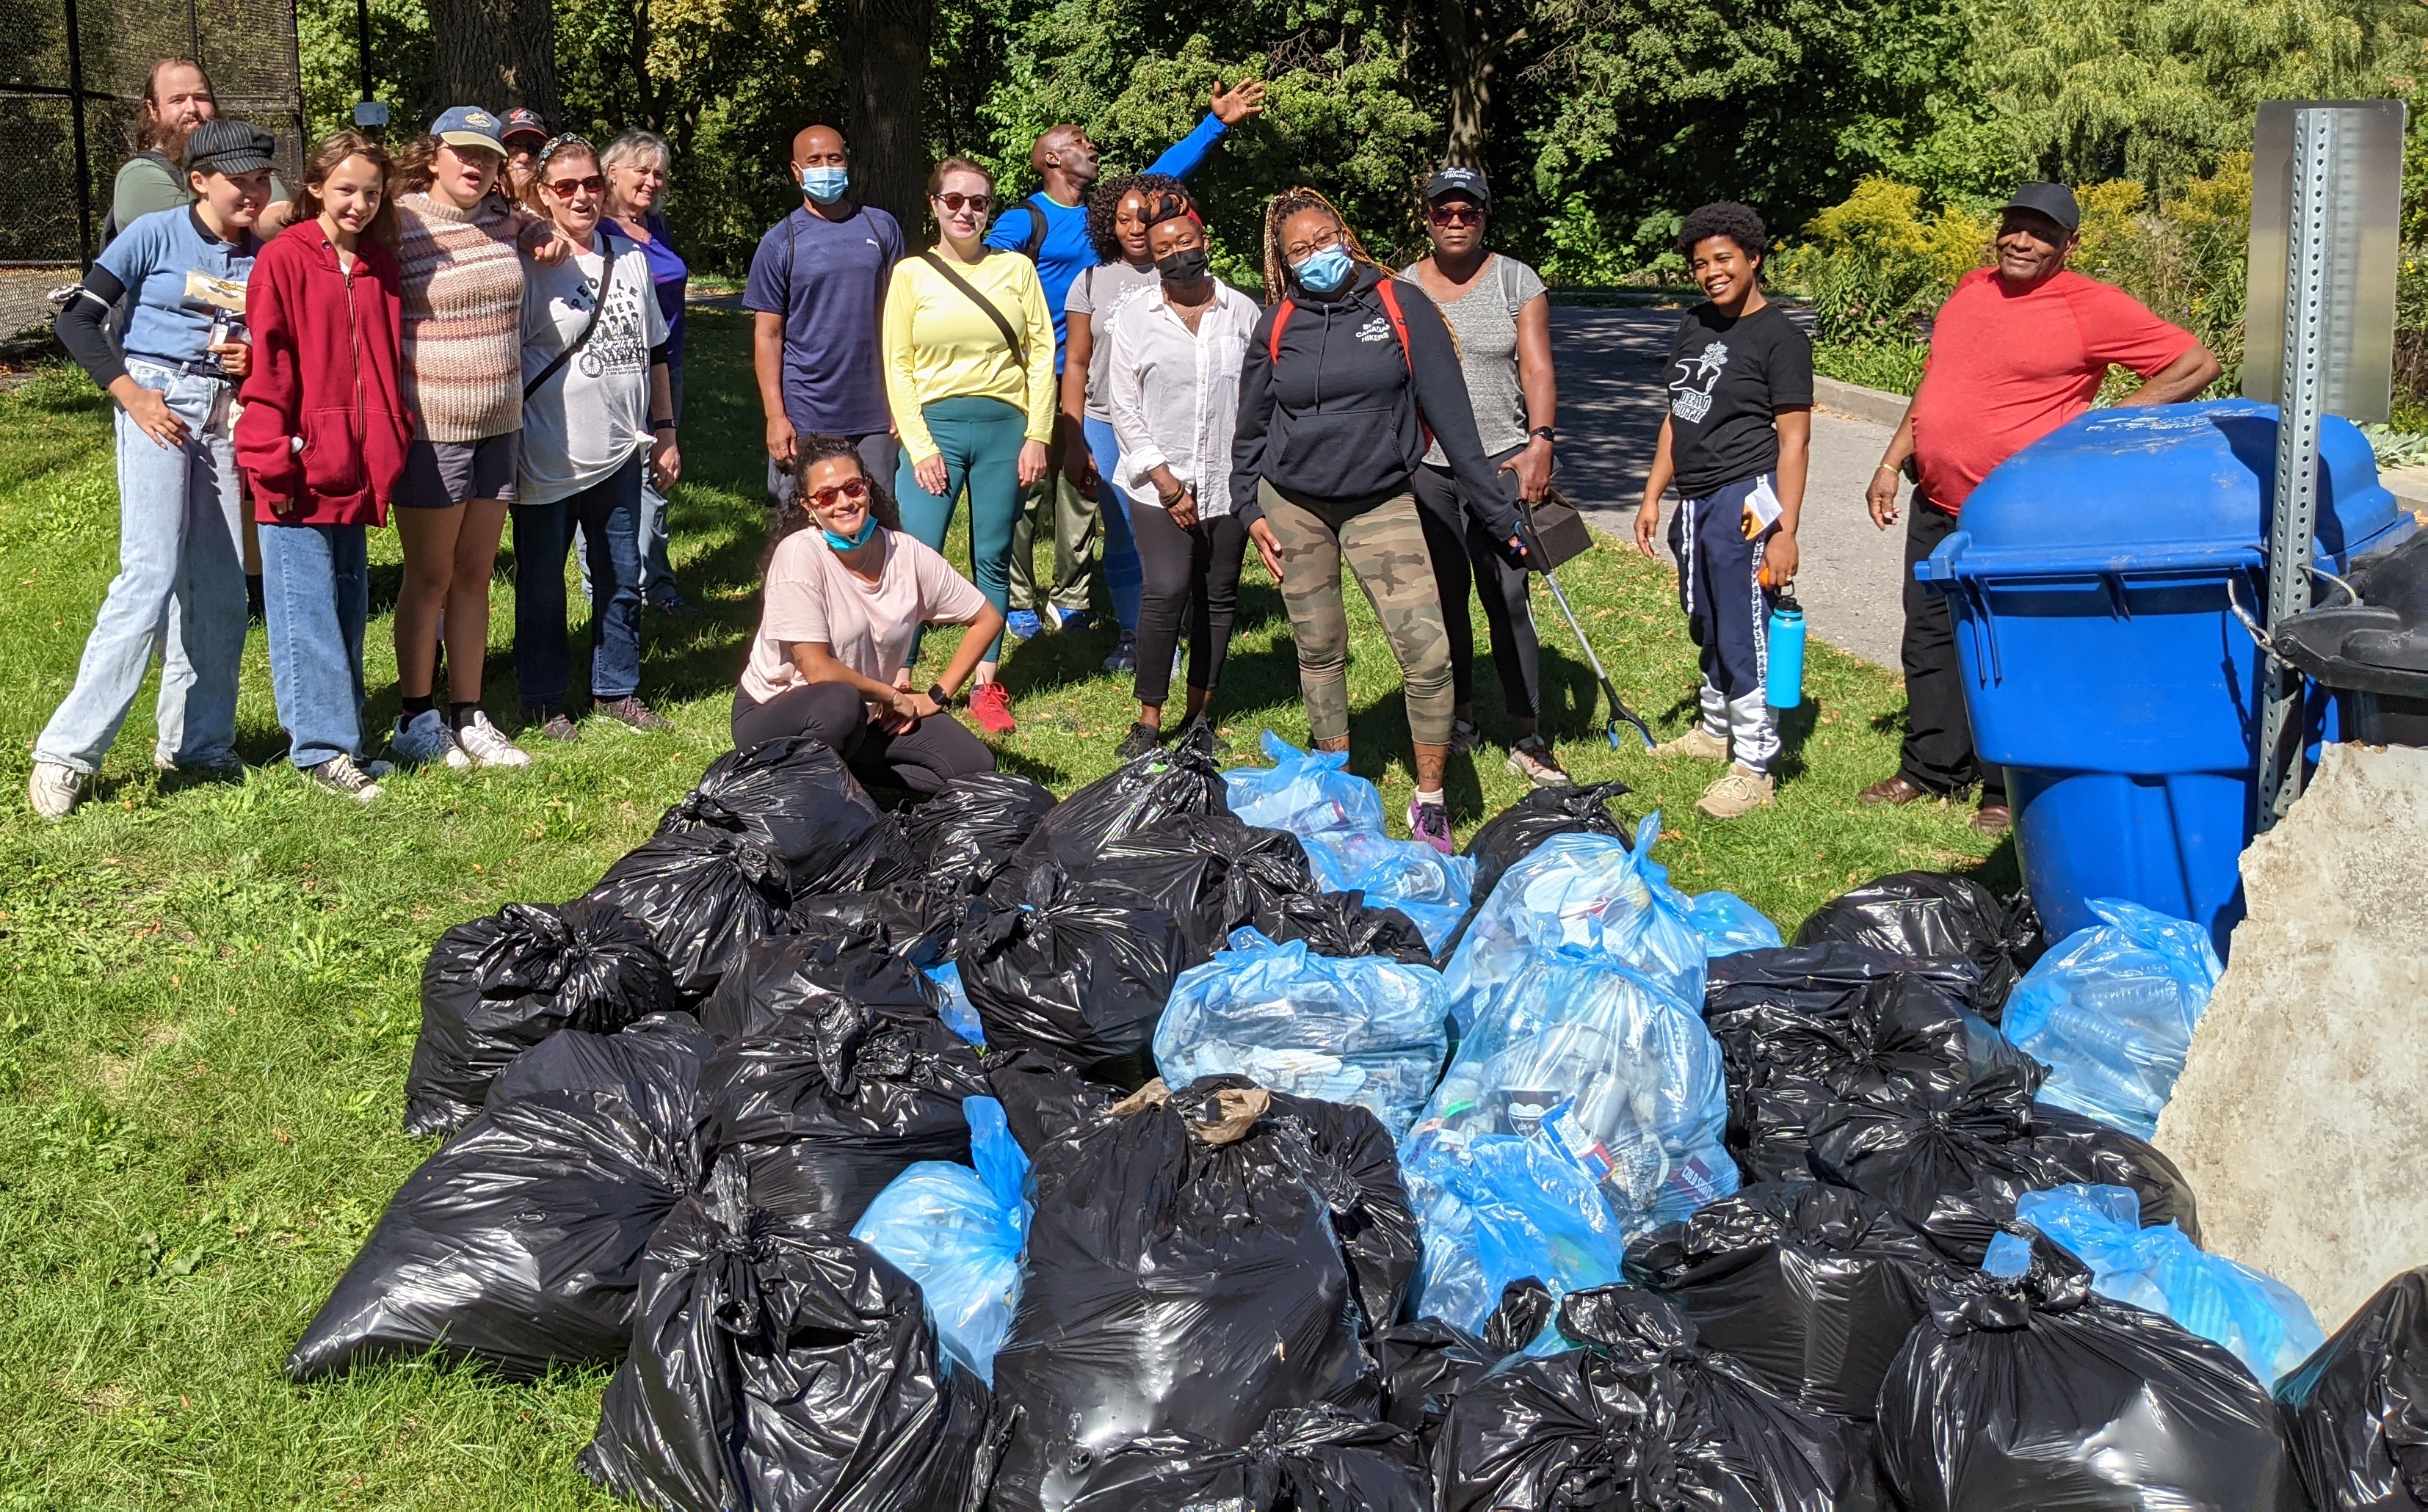 humber river pals group picture with trash